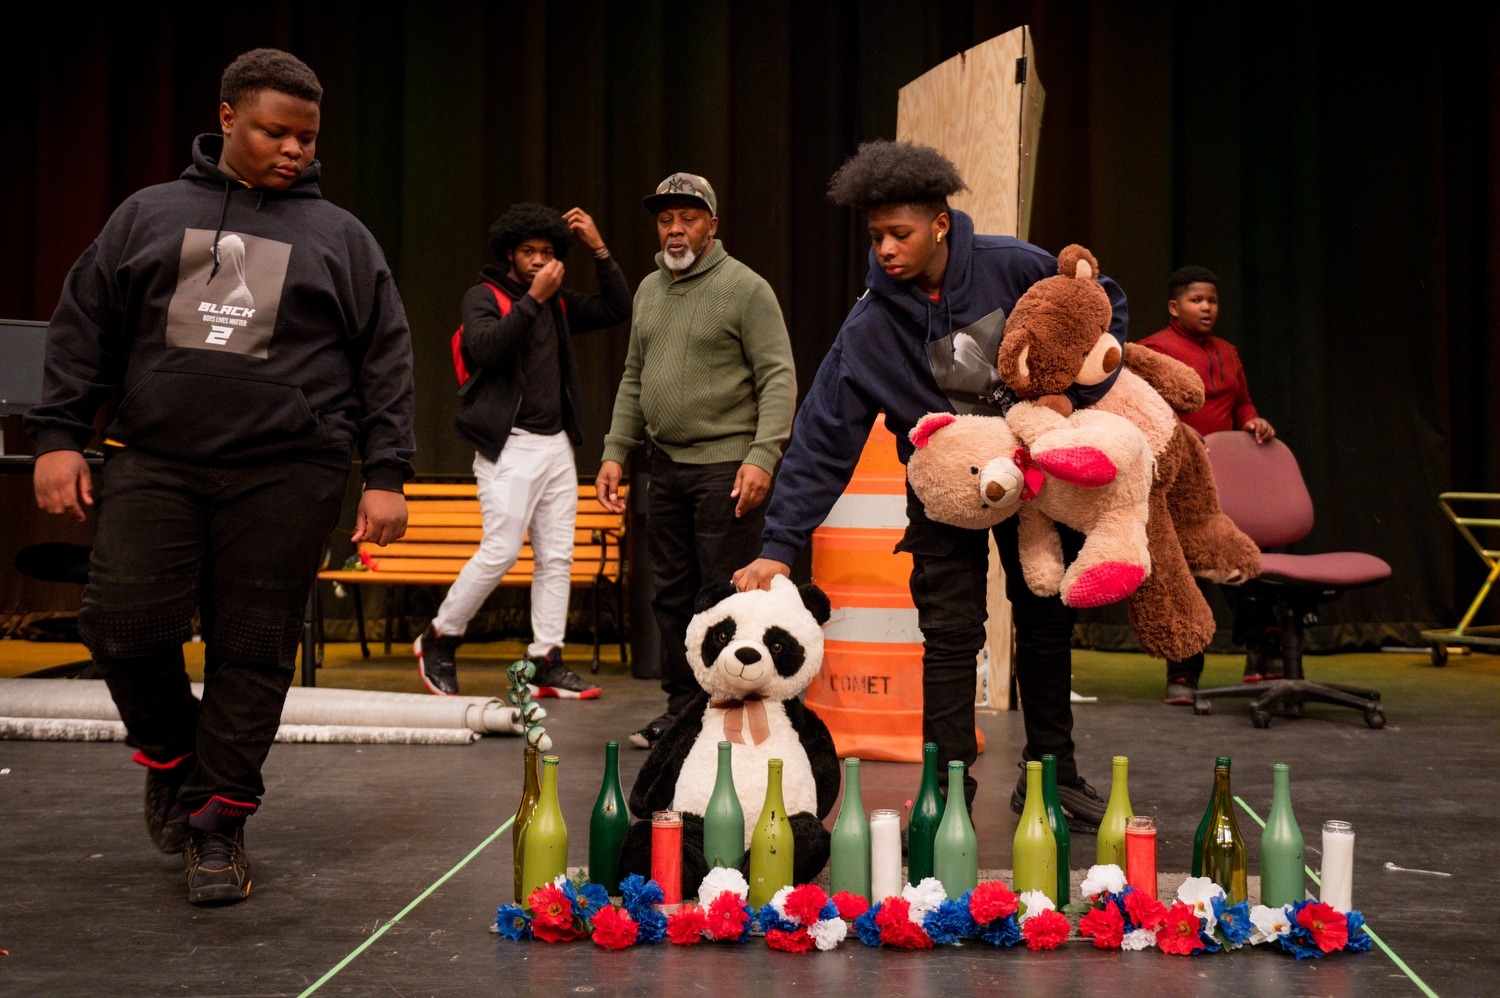 Robert Ricks Student Theater Production
His organization is called Mentors Inspiring Boys and Girls
Ricks, a playwright and author, runs an after school play production with students across Rochester. This production is called “The School to Prison Pipeline, The Stage Play”